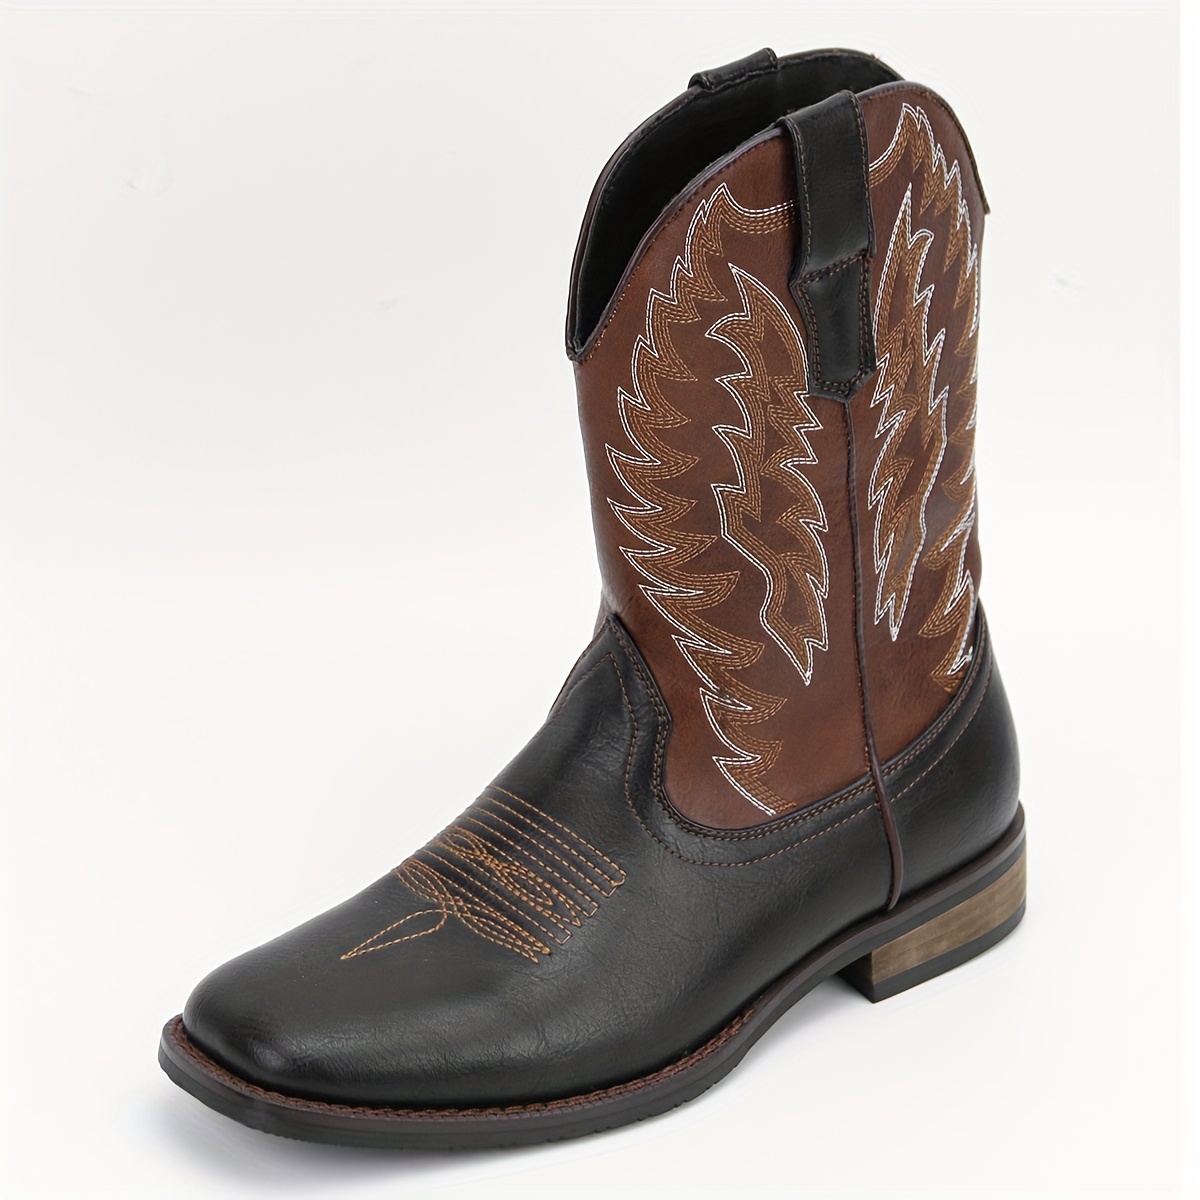 mens square toe roper boots western cowboy boots embroidered mid calf roper boots details 7